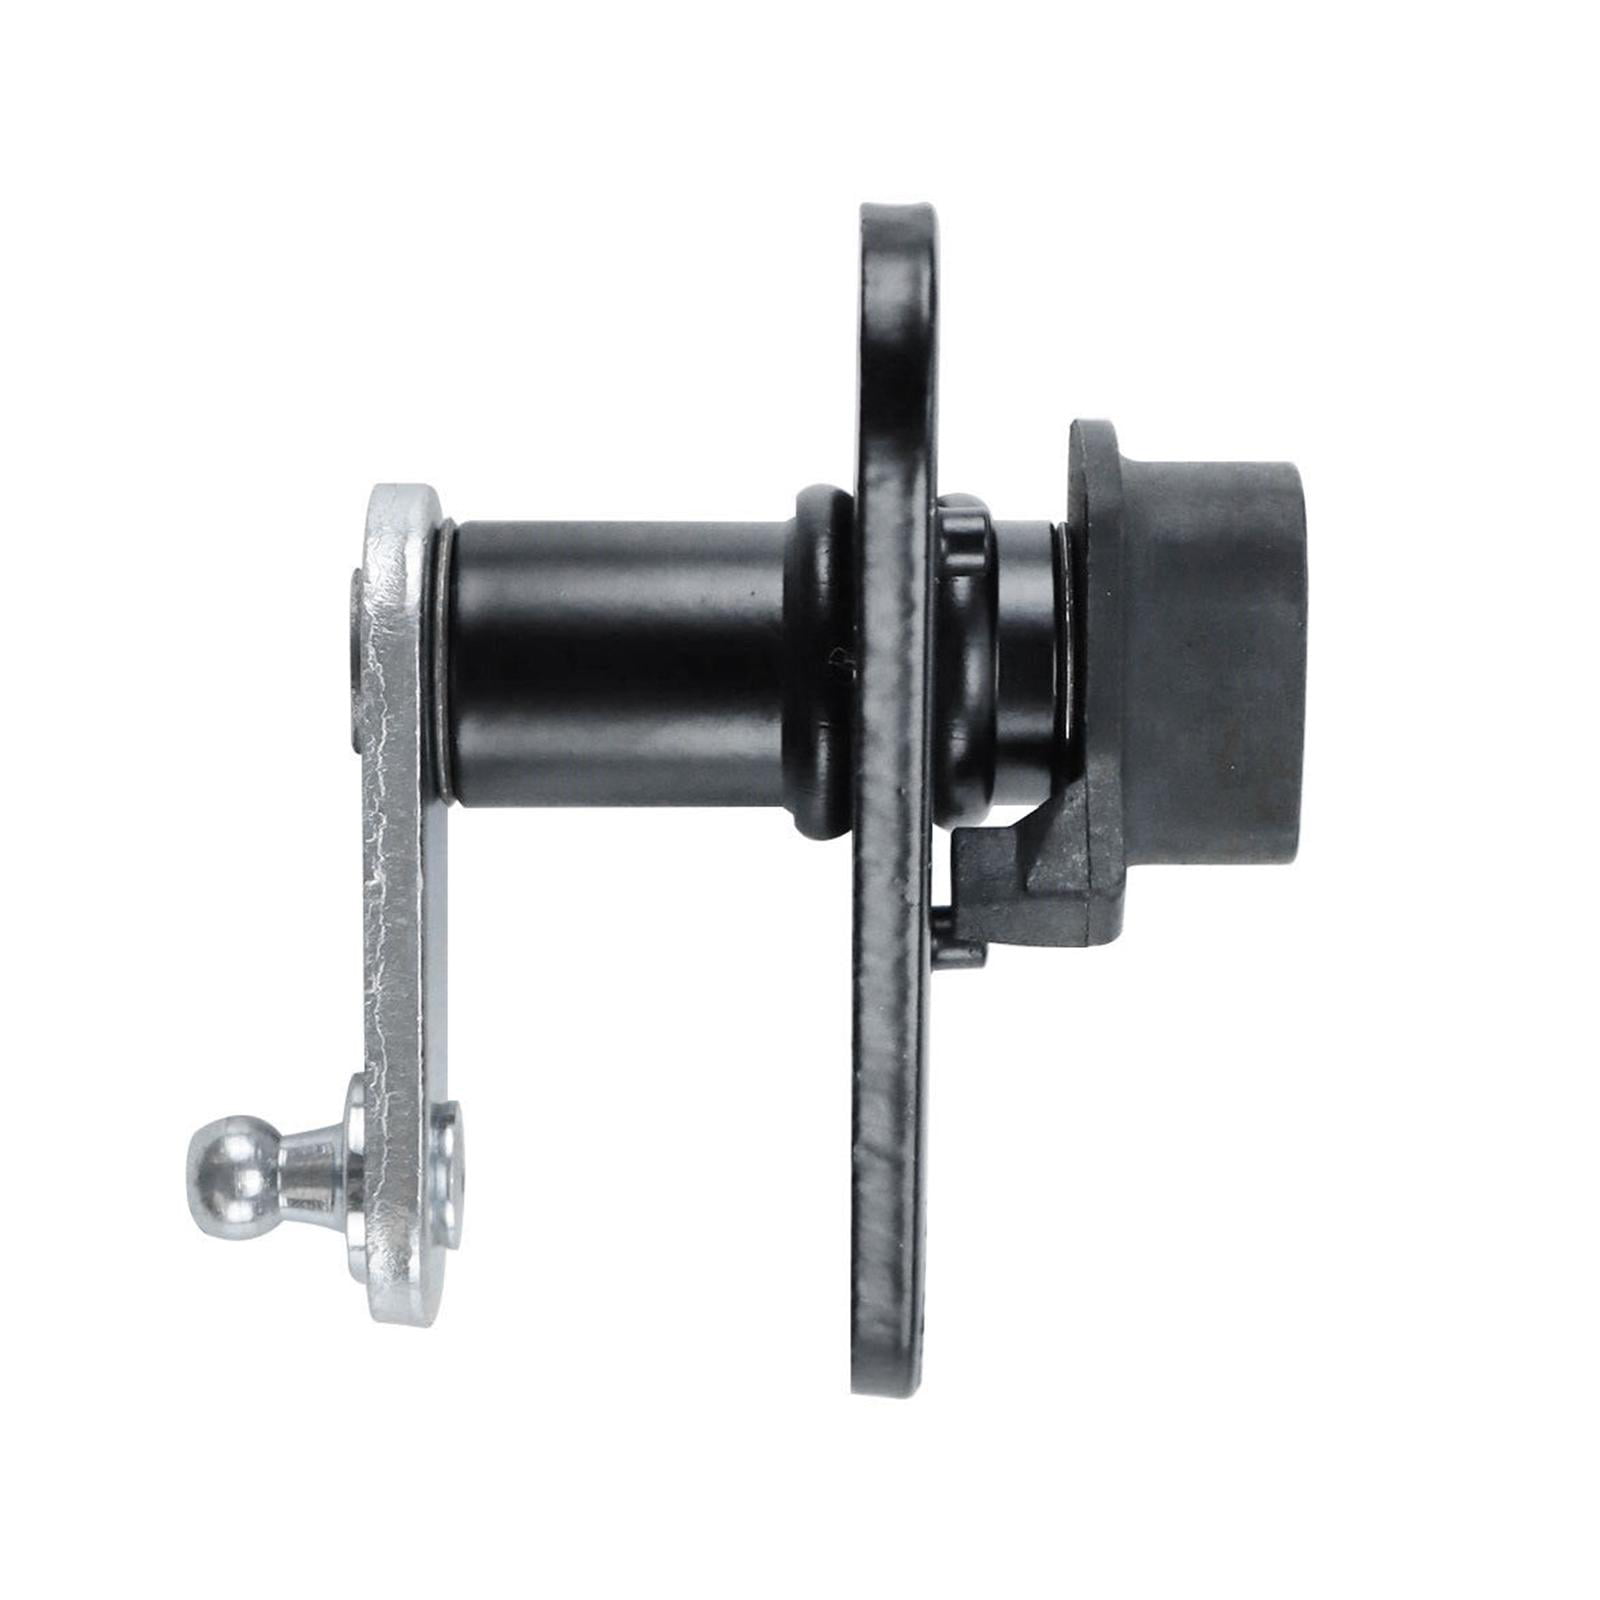 Tailgate Hinge Roller Outer 93470-zh000 for Easily Install